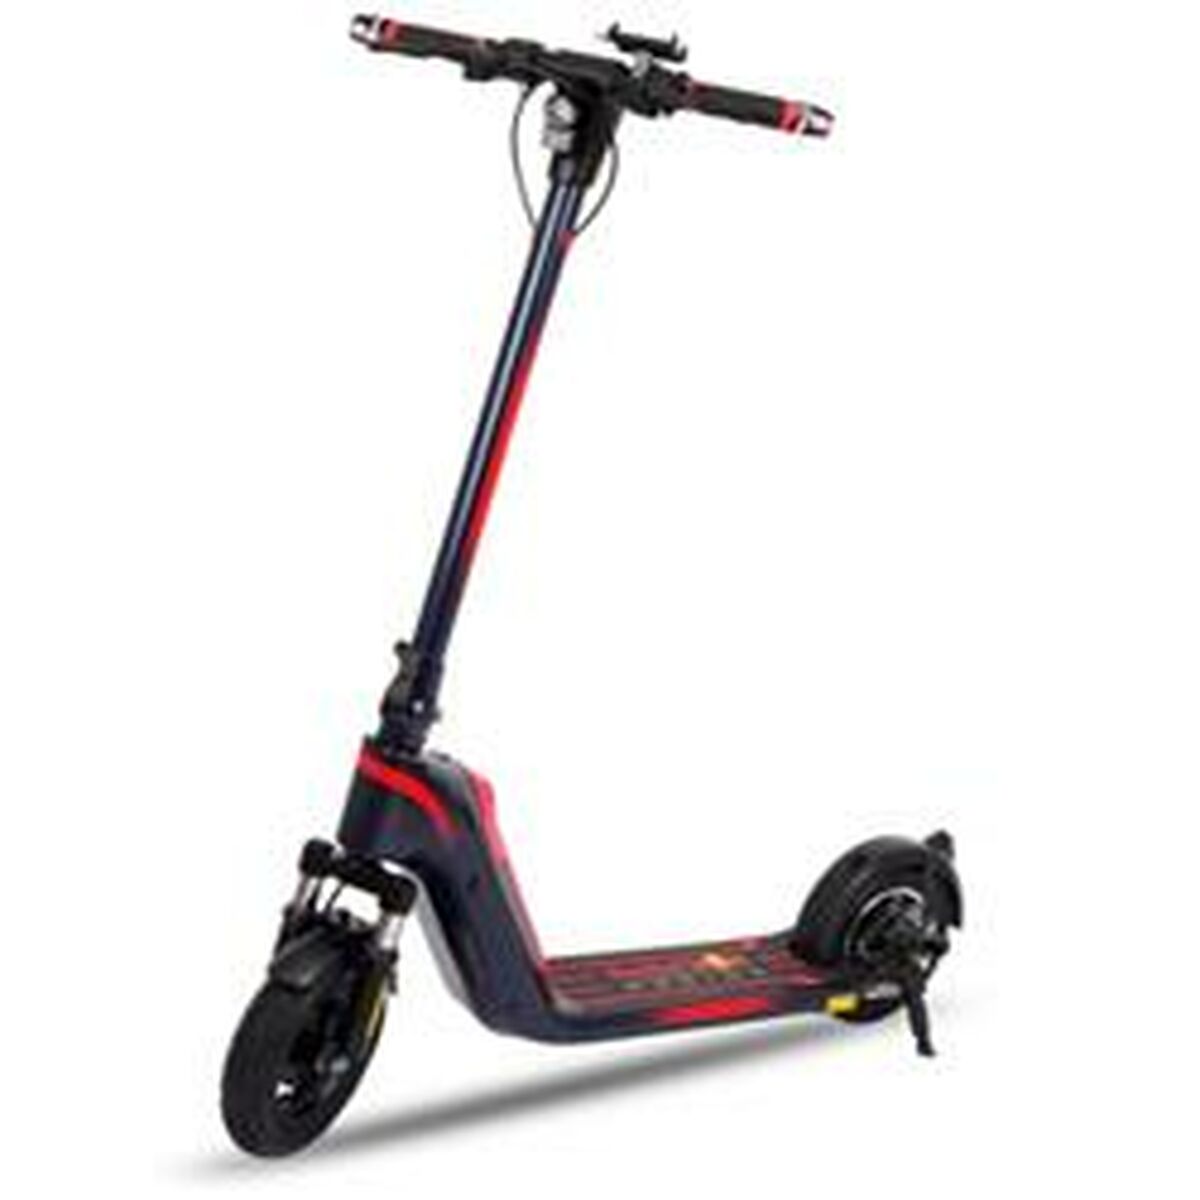 Electric Scooter Red Bull RB-RTENTAKEUP10-10-ES, Red Bull, Sports and outdoors, Urban mobility, electric-scooter-red-bull-rb-rtentakeup10-10-es, Brand_Red Bull, category-reference-2609, category-reference-2629, category-reference-2904, category-reference-t-19681, category-reference-t-19756, category-reference-t-19876, category-reference-t-21245, Condition_NEW, deportista / en forma, Price_800 - 900, RiotNook